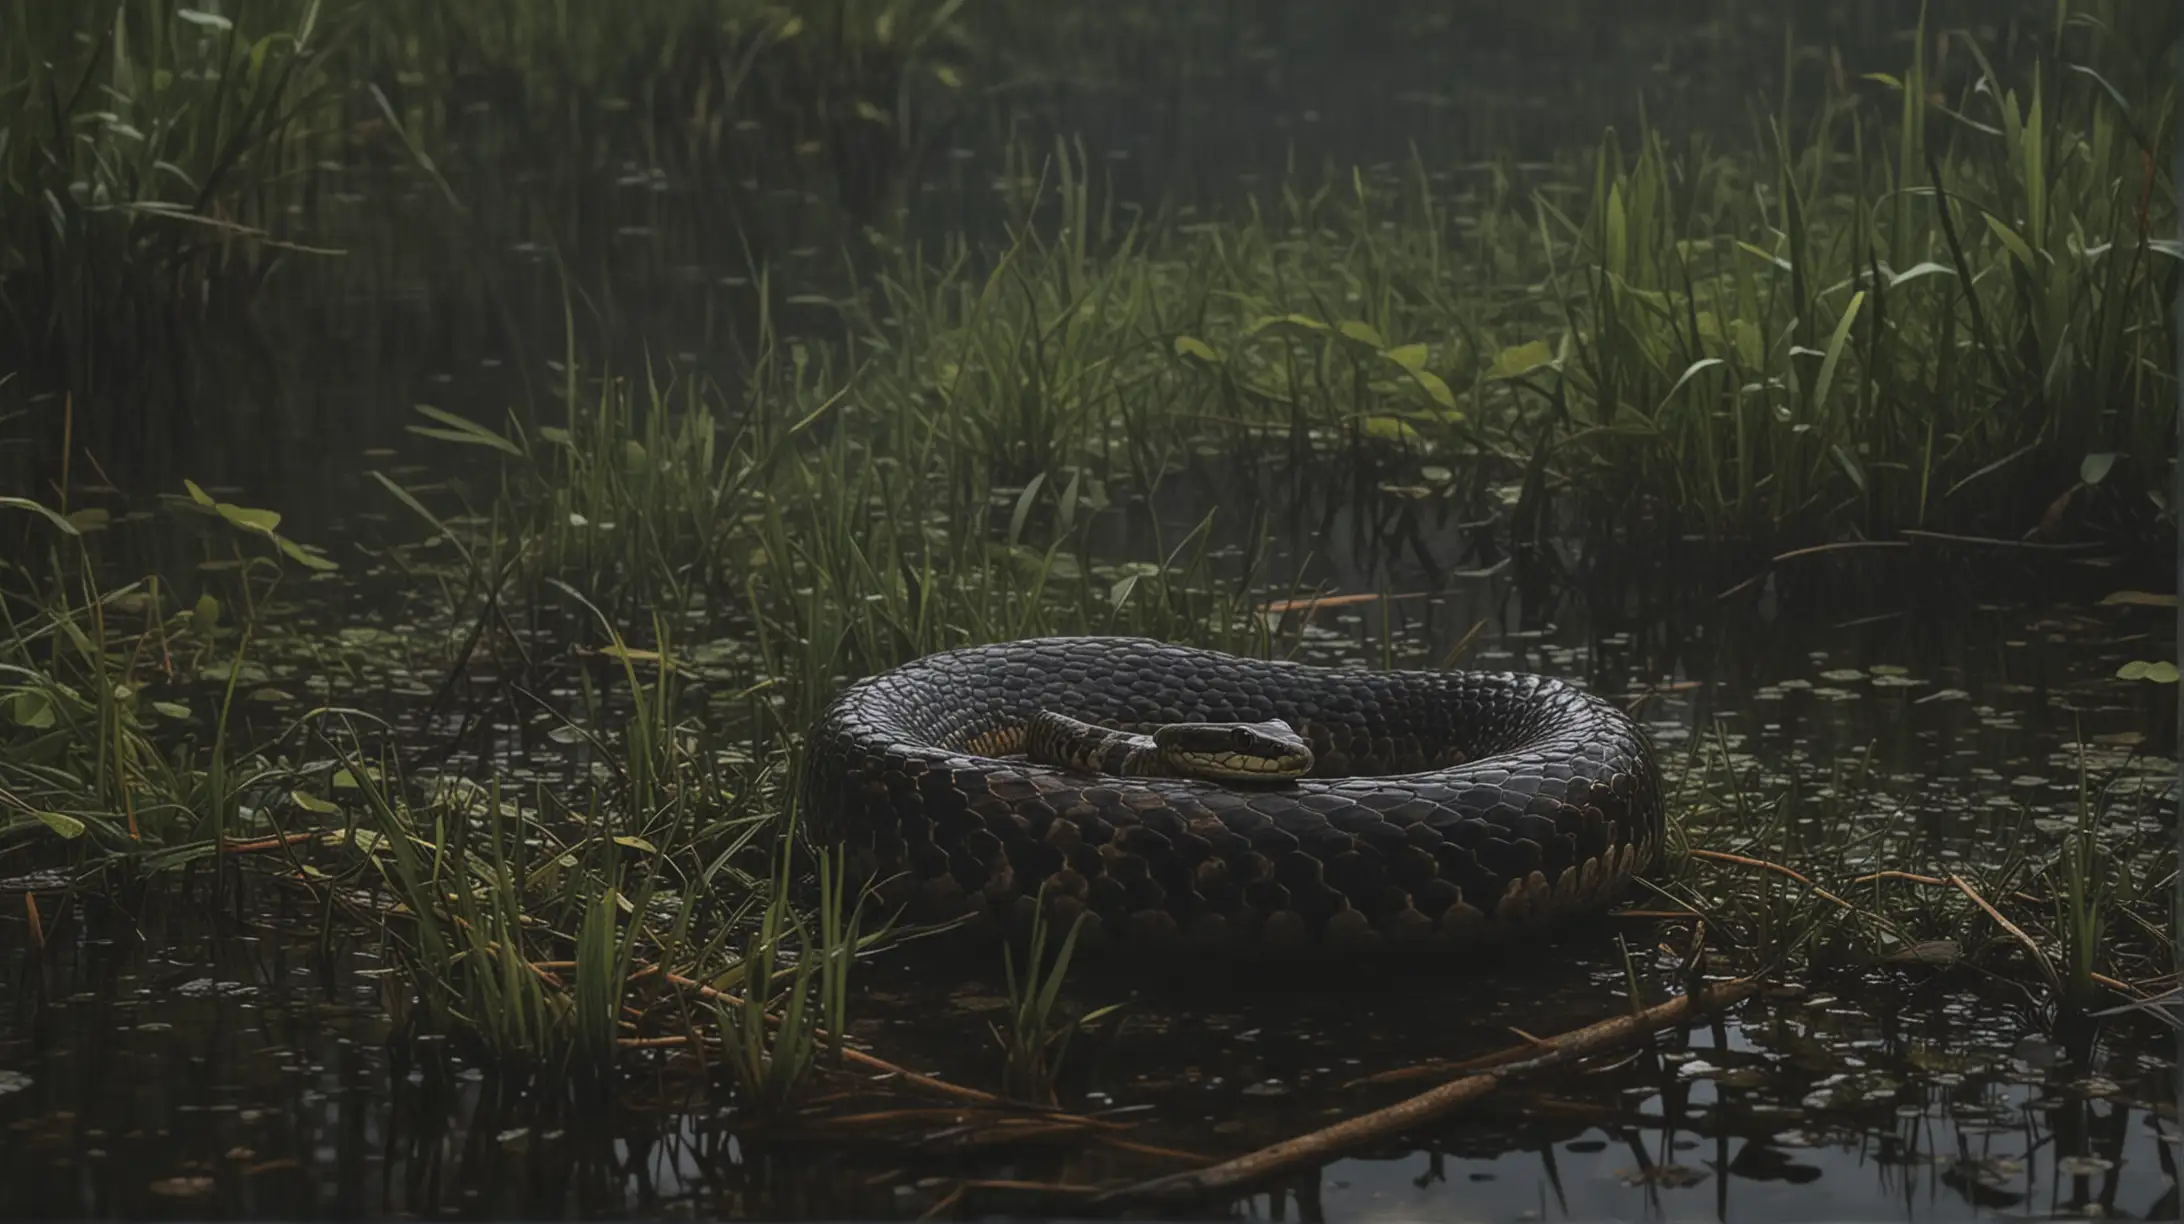 Sinister Water Moccasin on Murky Swamp Bank